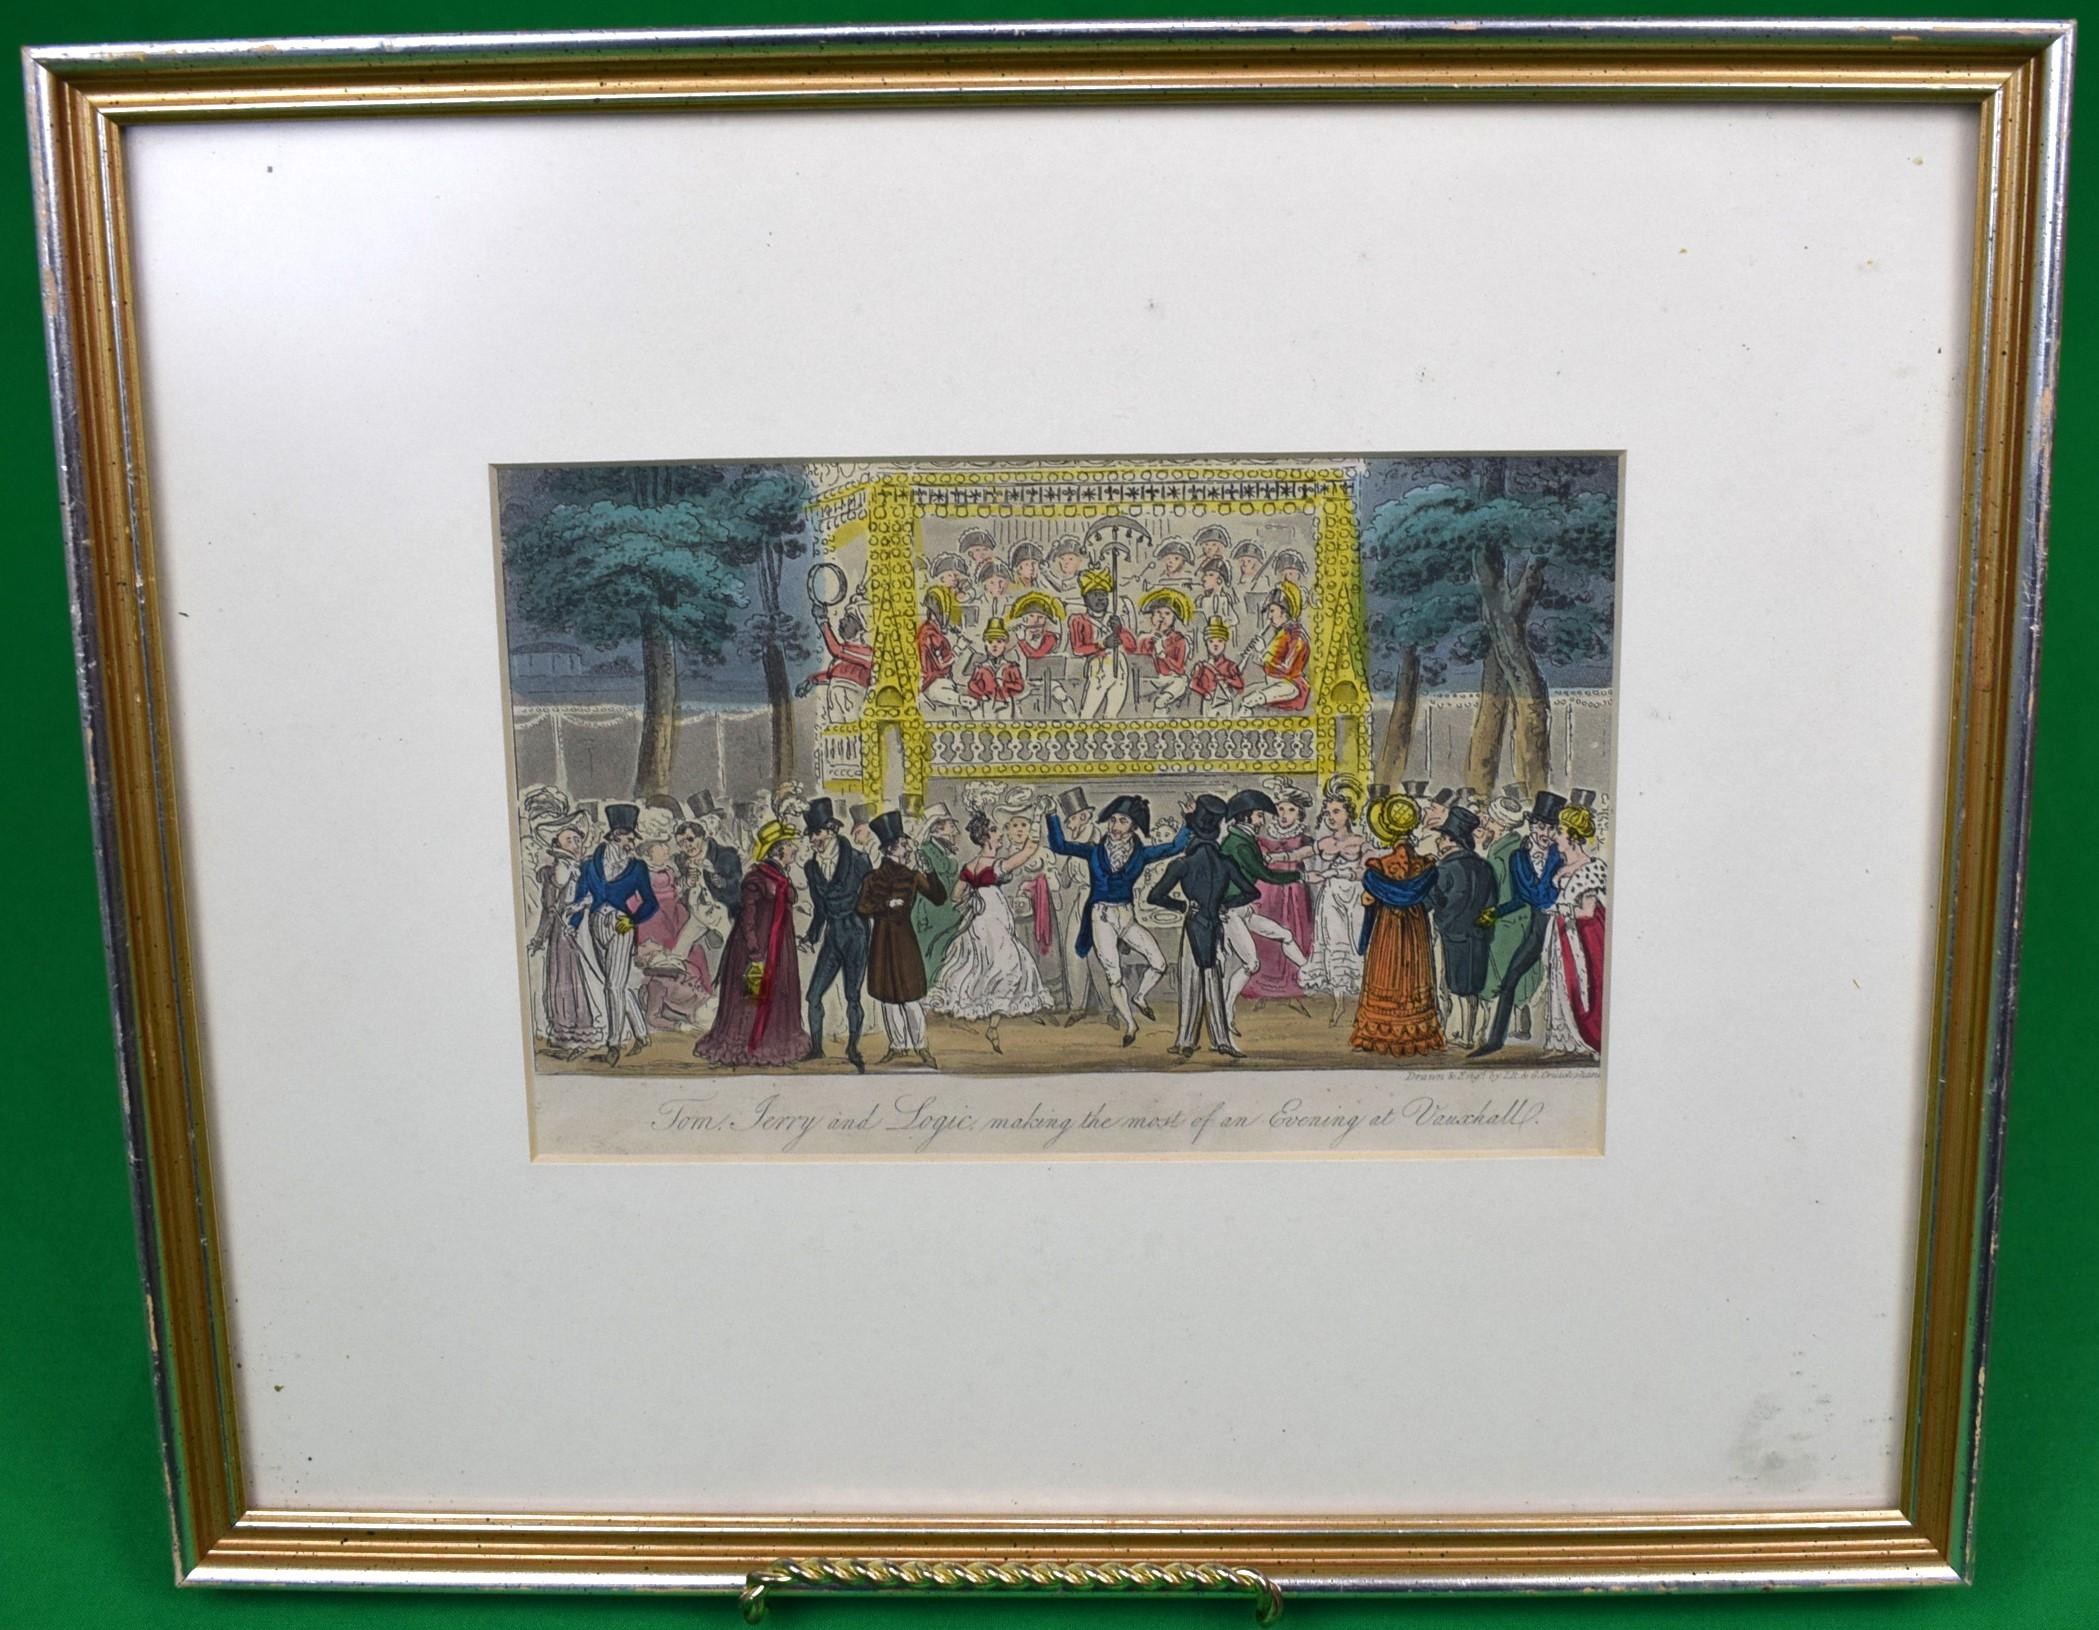 "Tom Jerry And Logic: Making The Most Of An Evening At Vauxhall" - Print by George Cruikshank